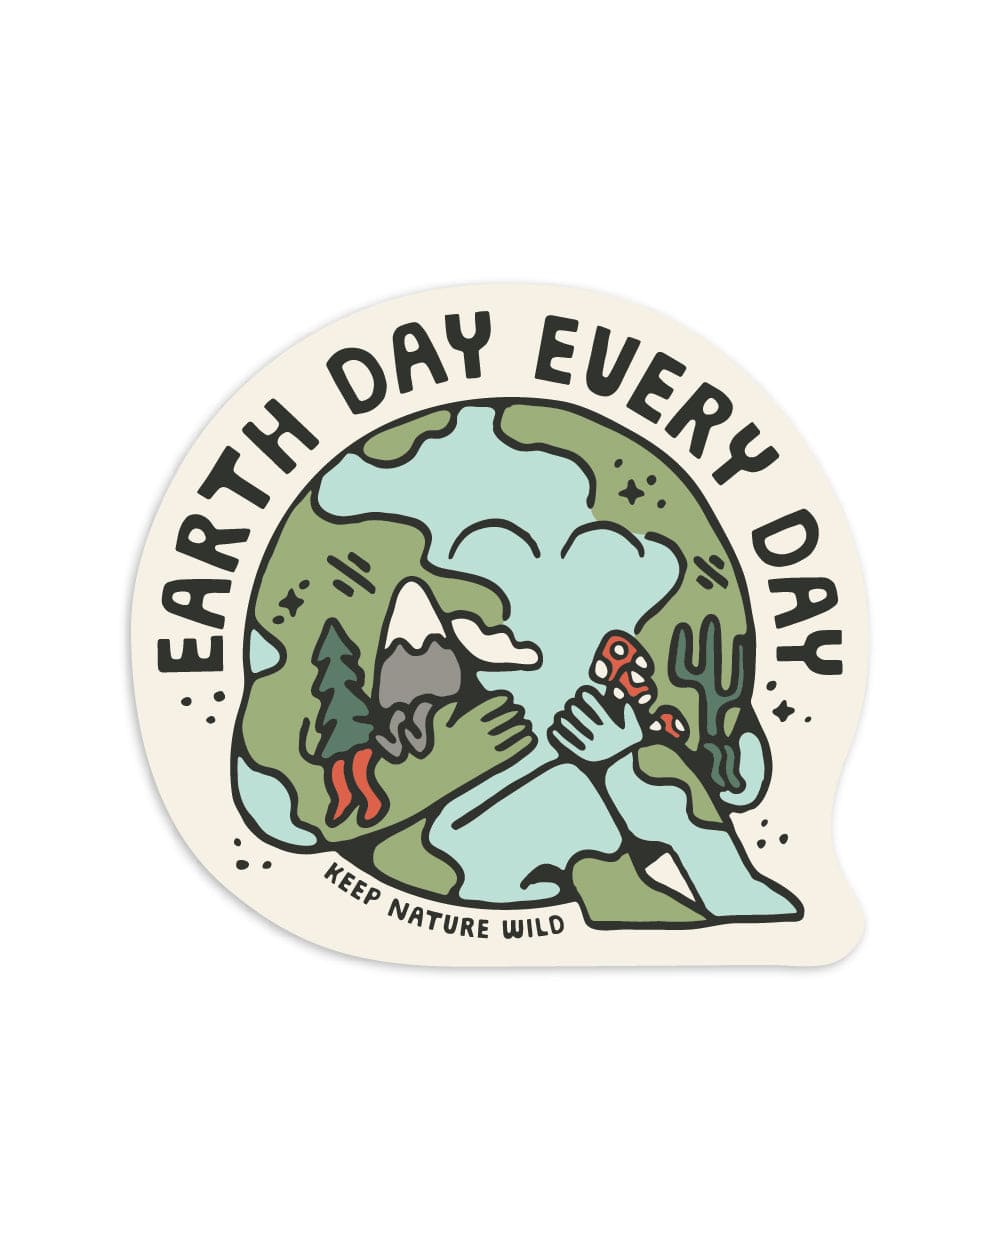 Keep Nature Wild Sticker Earth Day Every Day Friends | Sticker